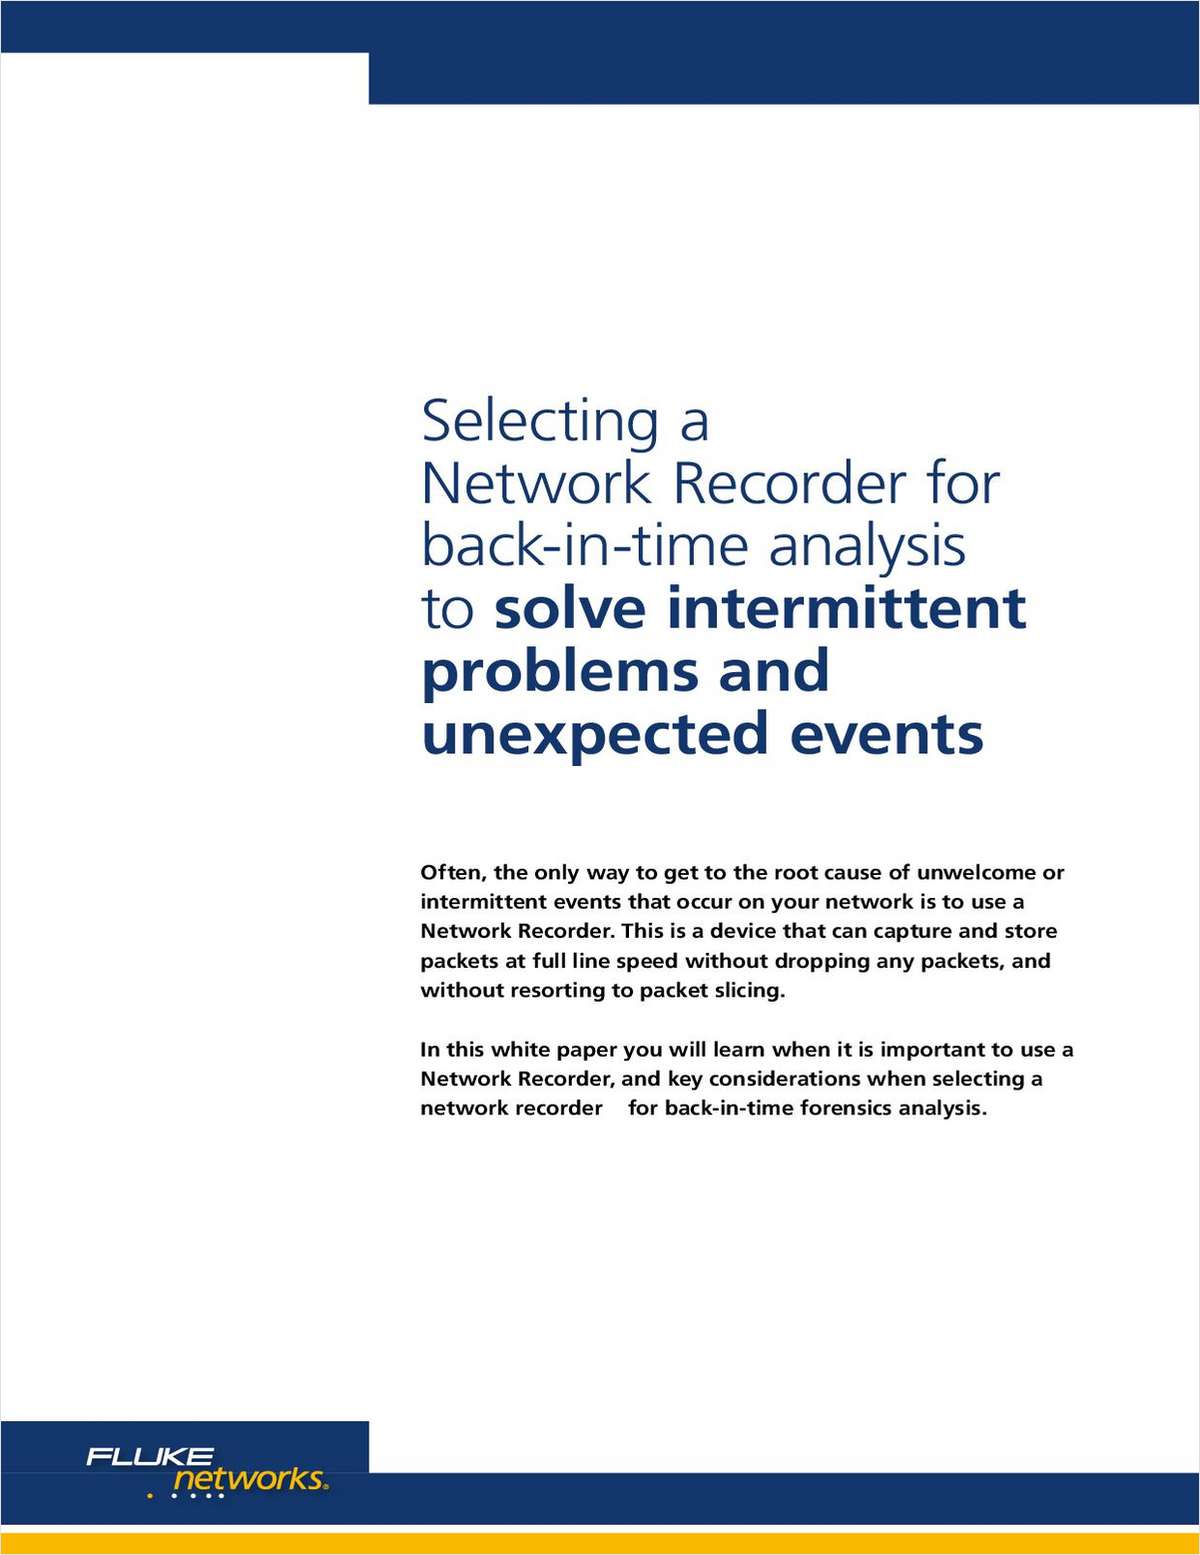 Selecting a Network Recorder for Back-in-Time Analysis